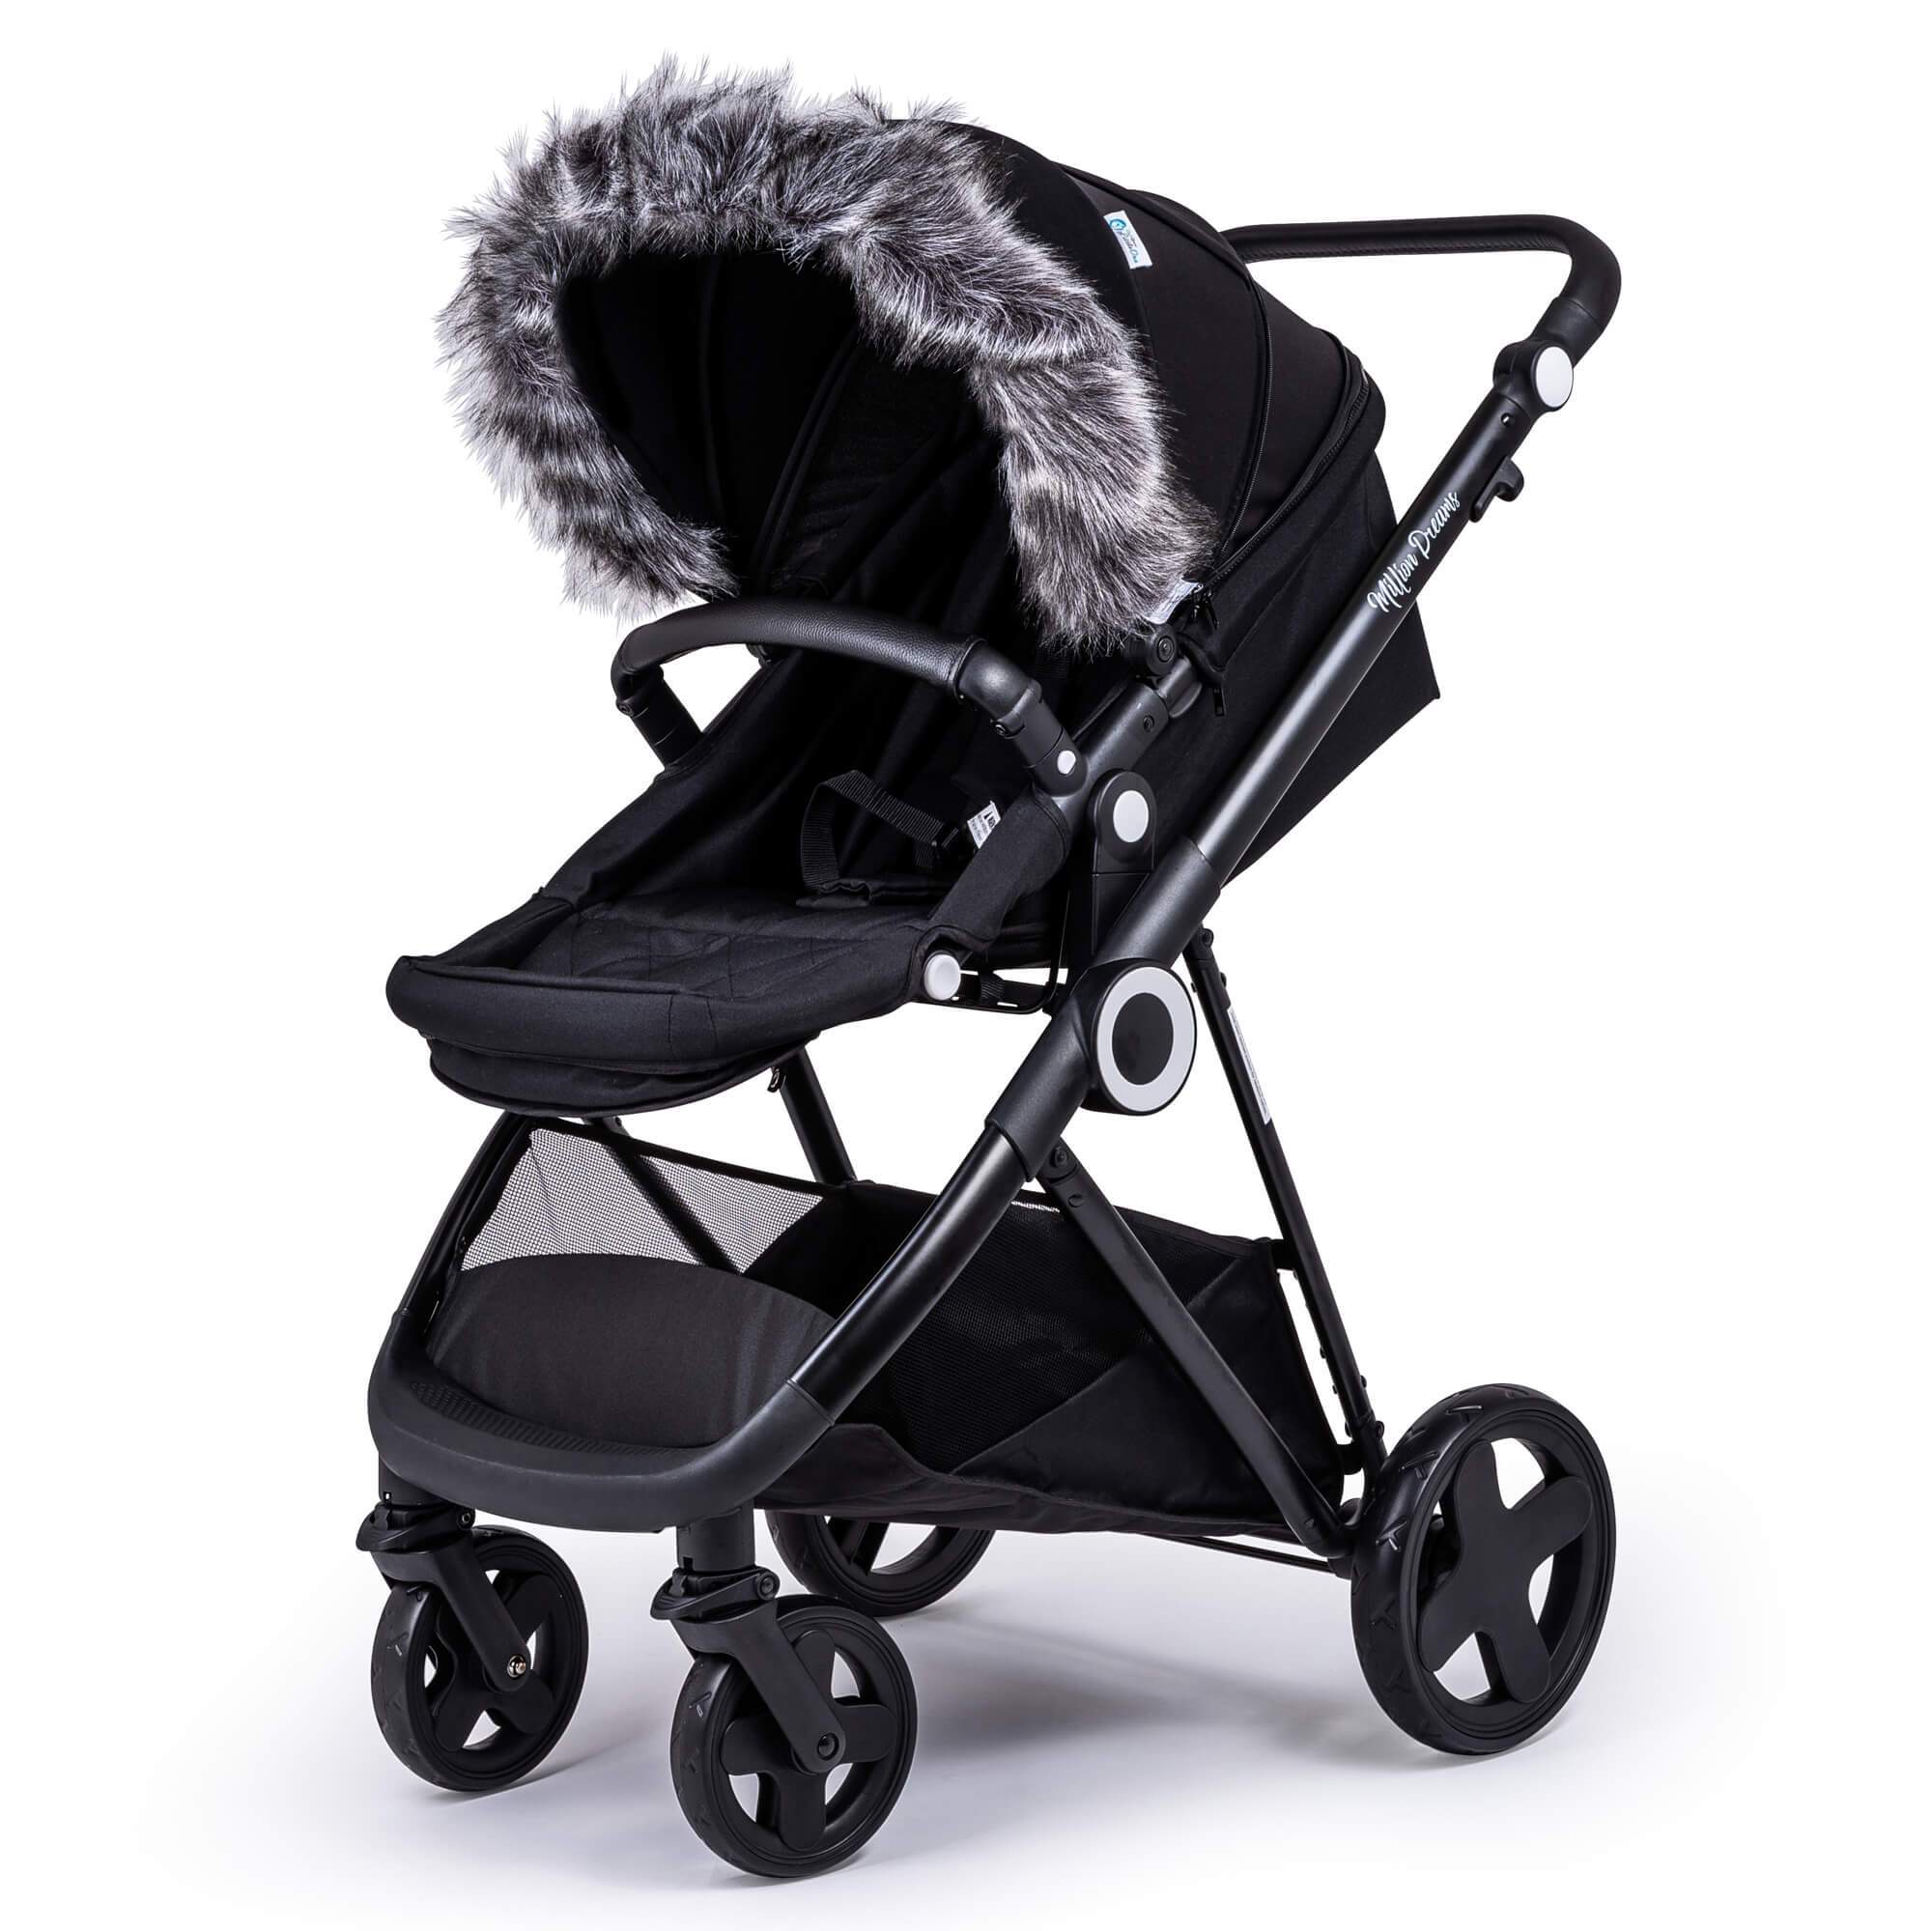 Pram Fur Hood Trim Attachment for Pushchair Compatible with BabyCare - Dark Grey / Fits All Models | For Your Little One